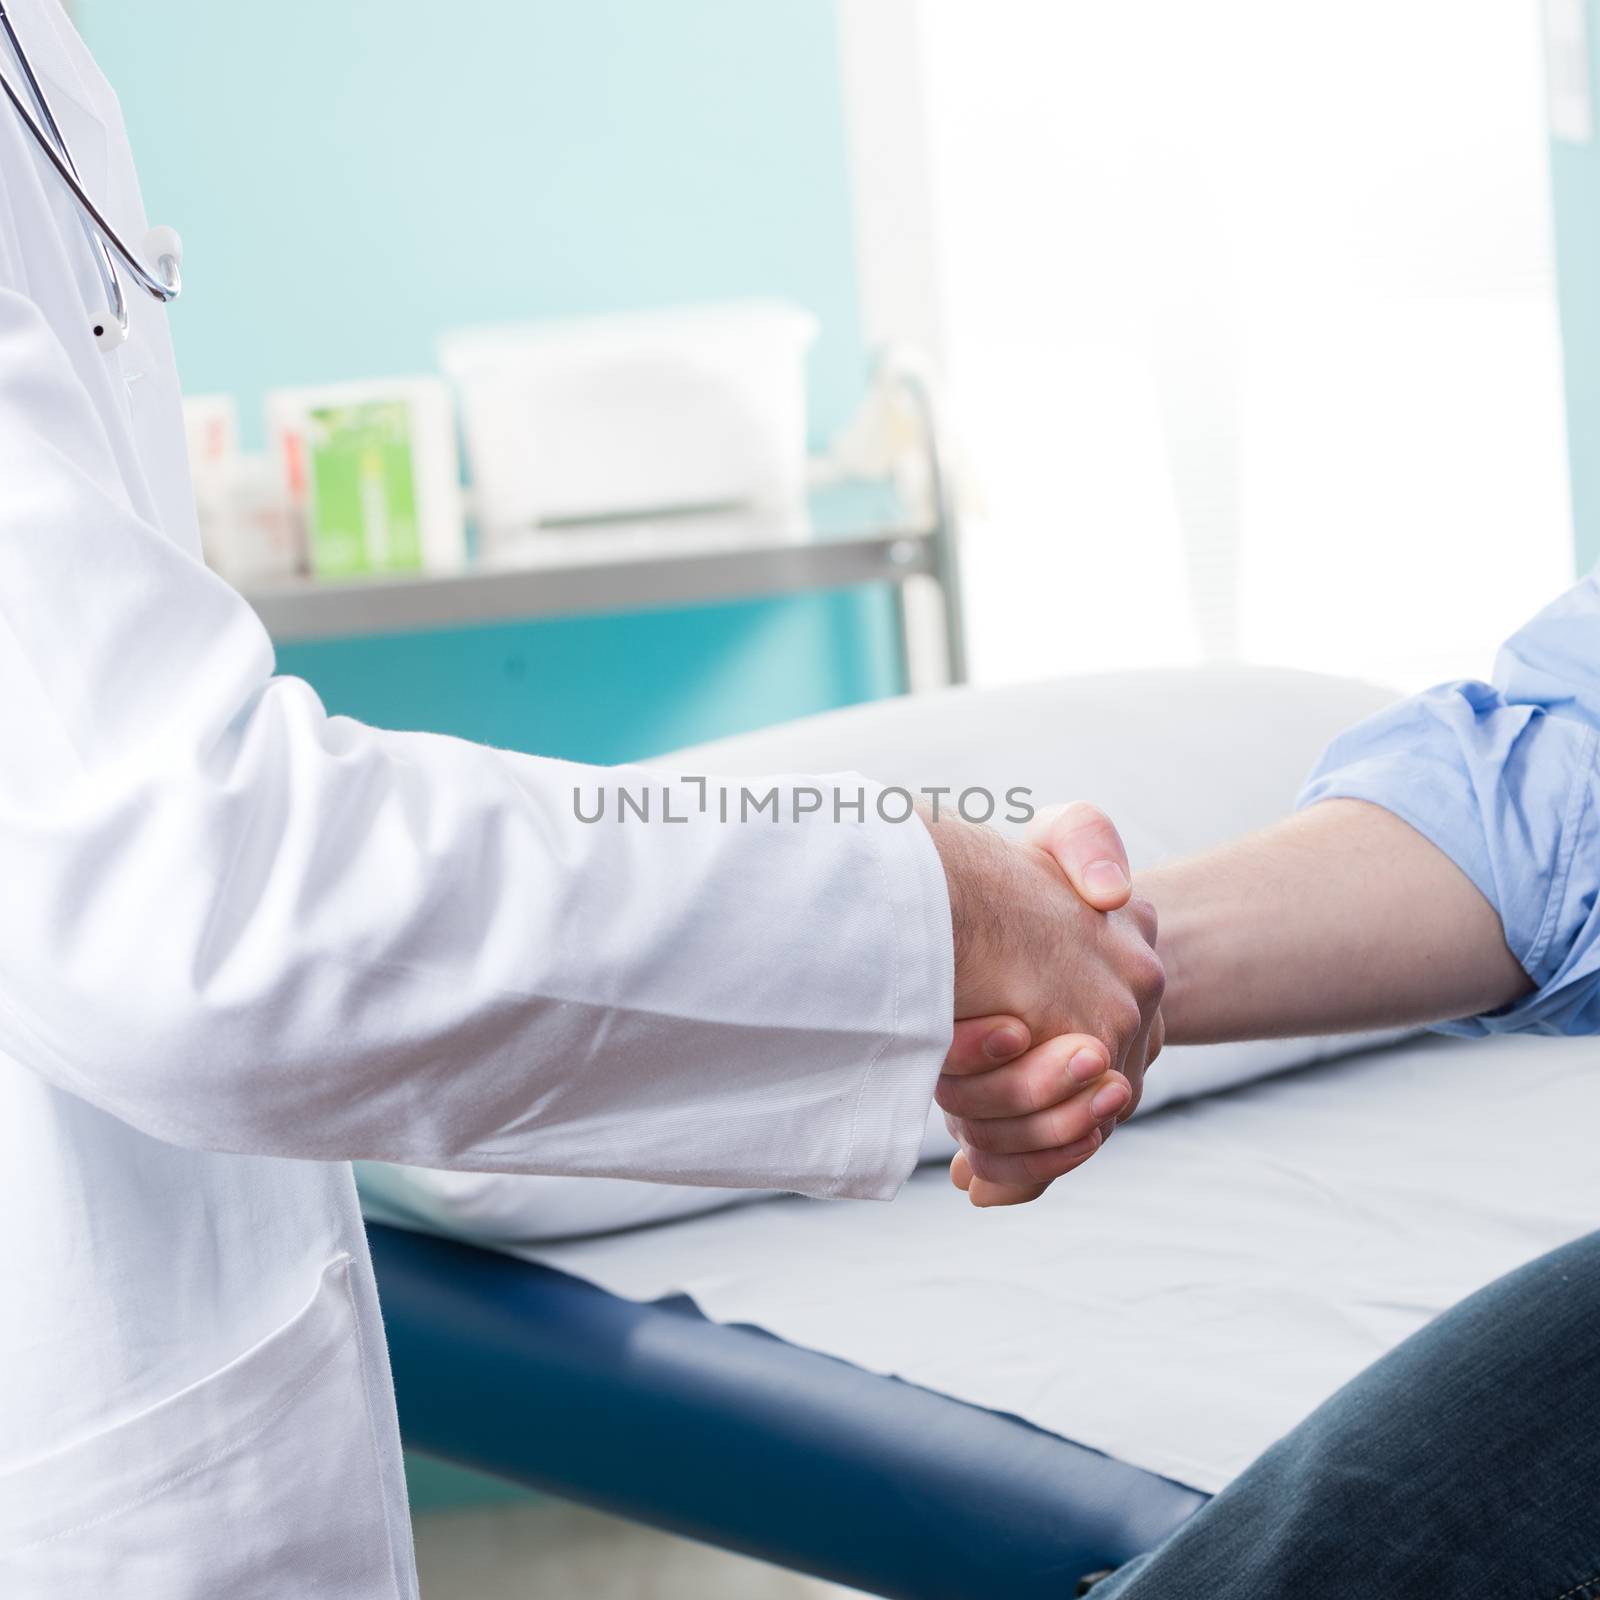 Doctor and patient handshake with medical equipment on the background.